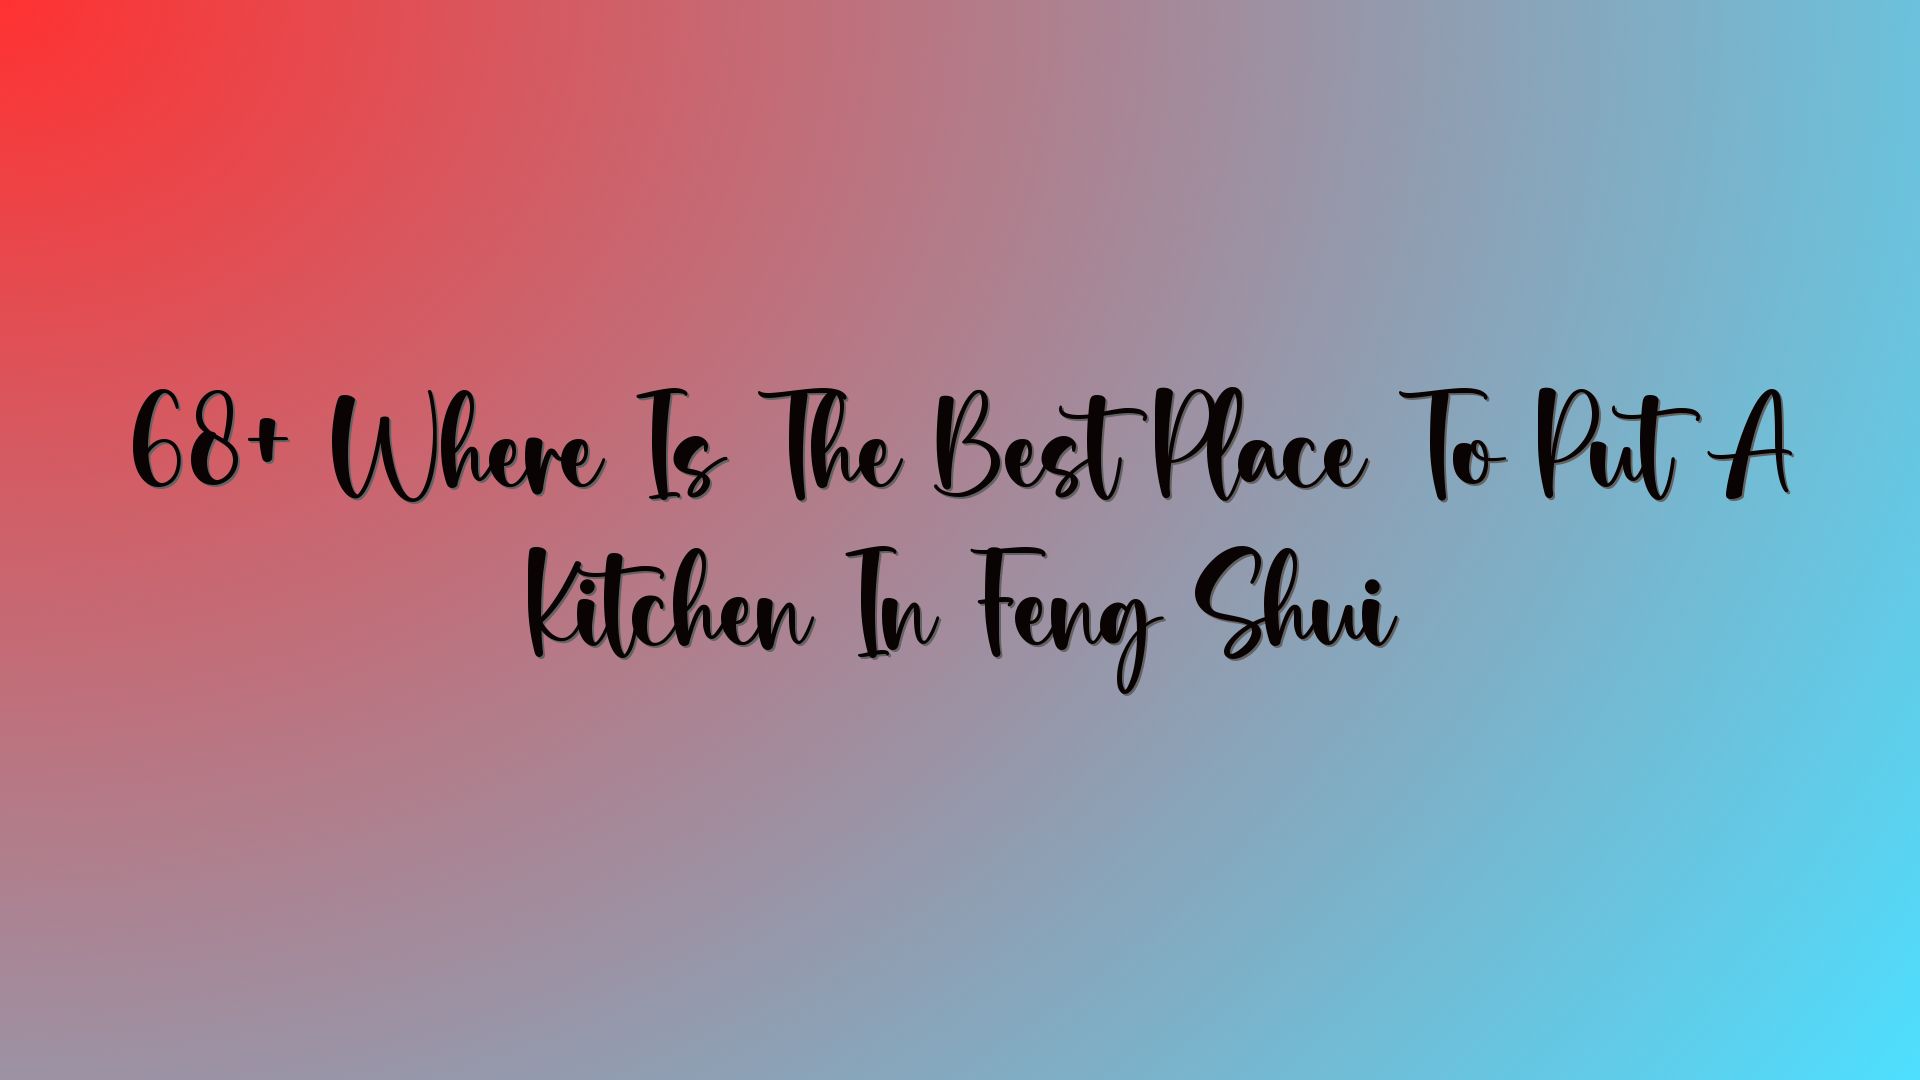 68+ Where Is The Best Place To Put A Kitchen In Feng Shui